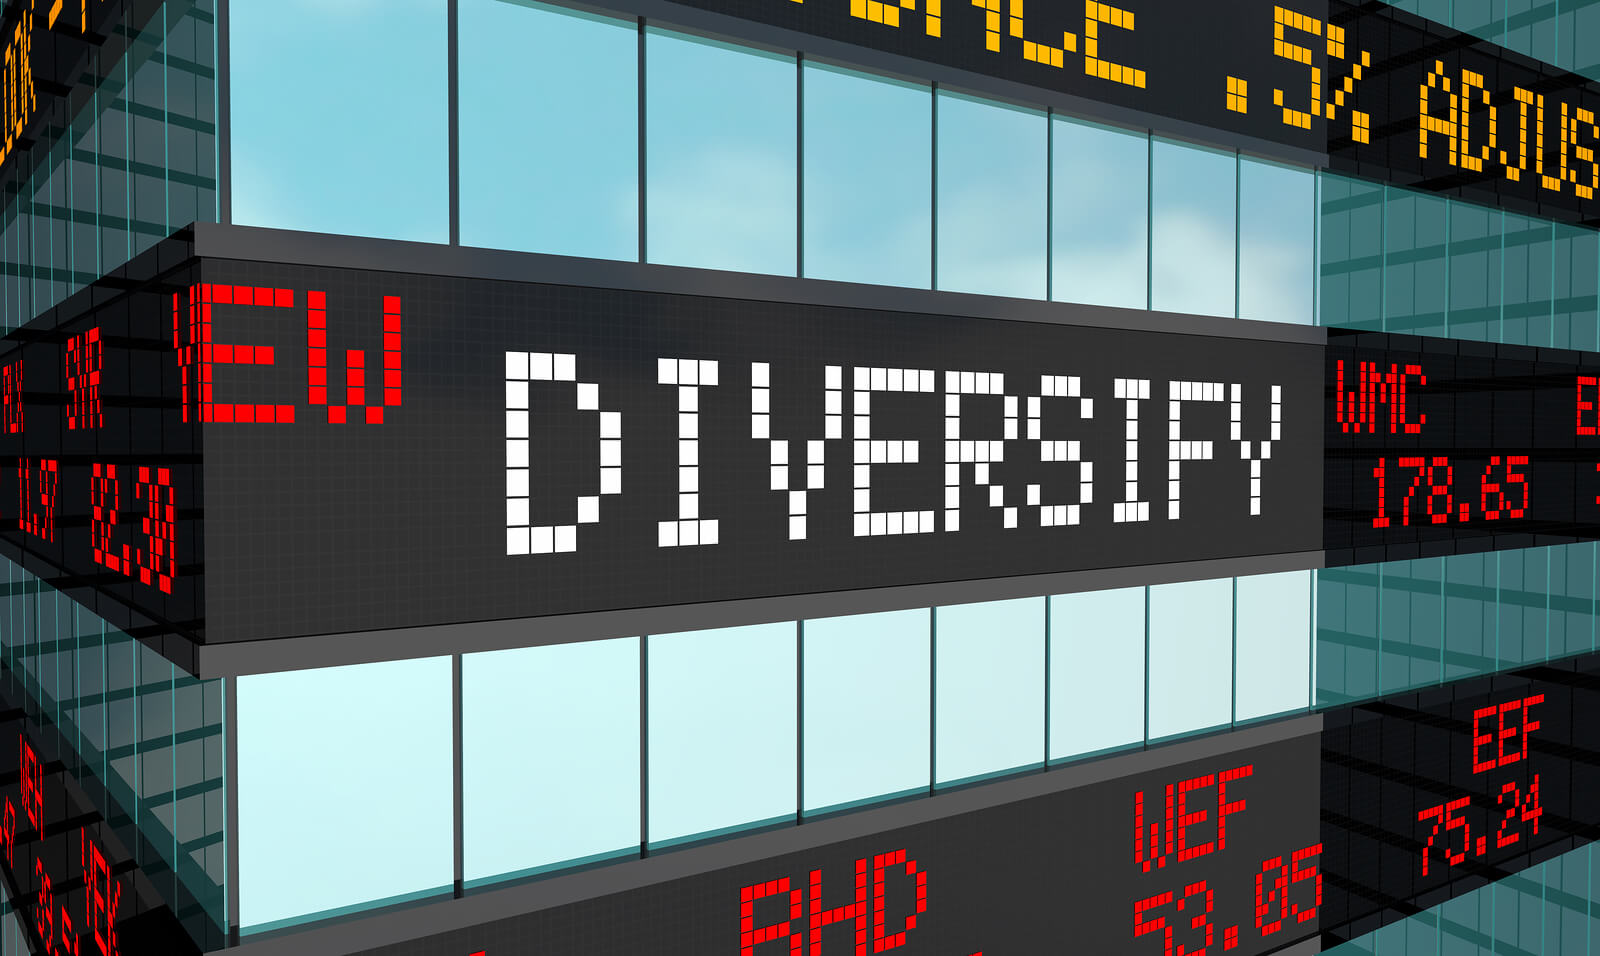 3D image of stock prices along the side of a building with the word 'Diversify' shown